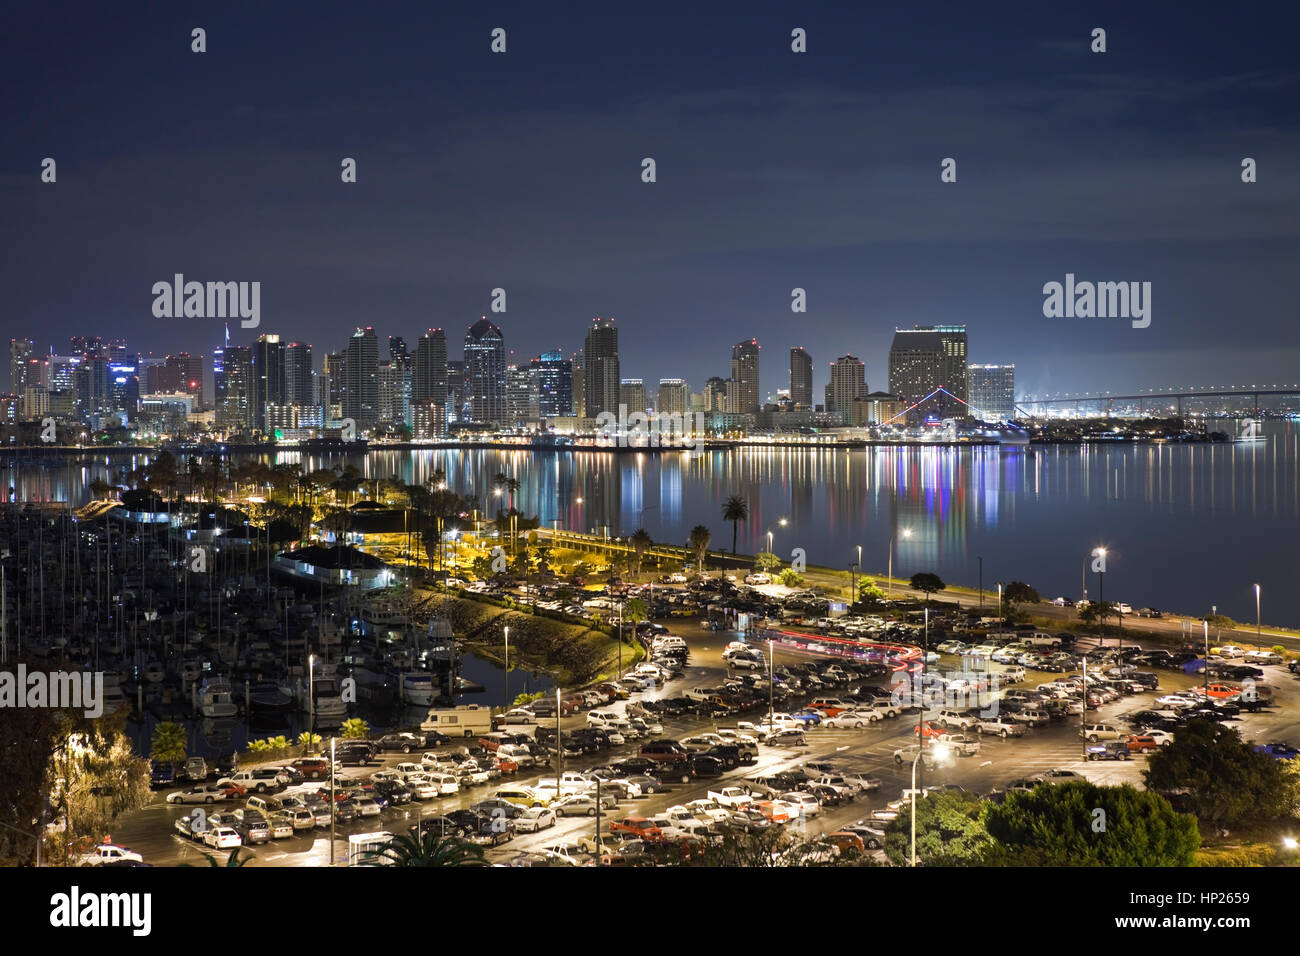 San Diego, California, USA - March 24, 2011:  San Diego bay and downtown towers glow brightly at night. Stock Photo